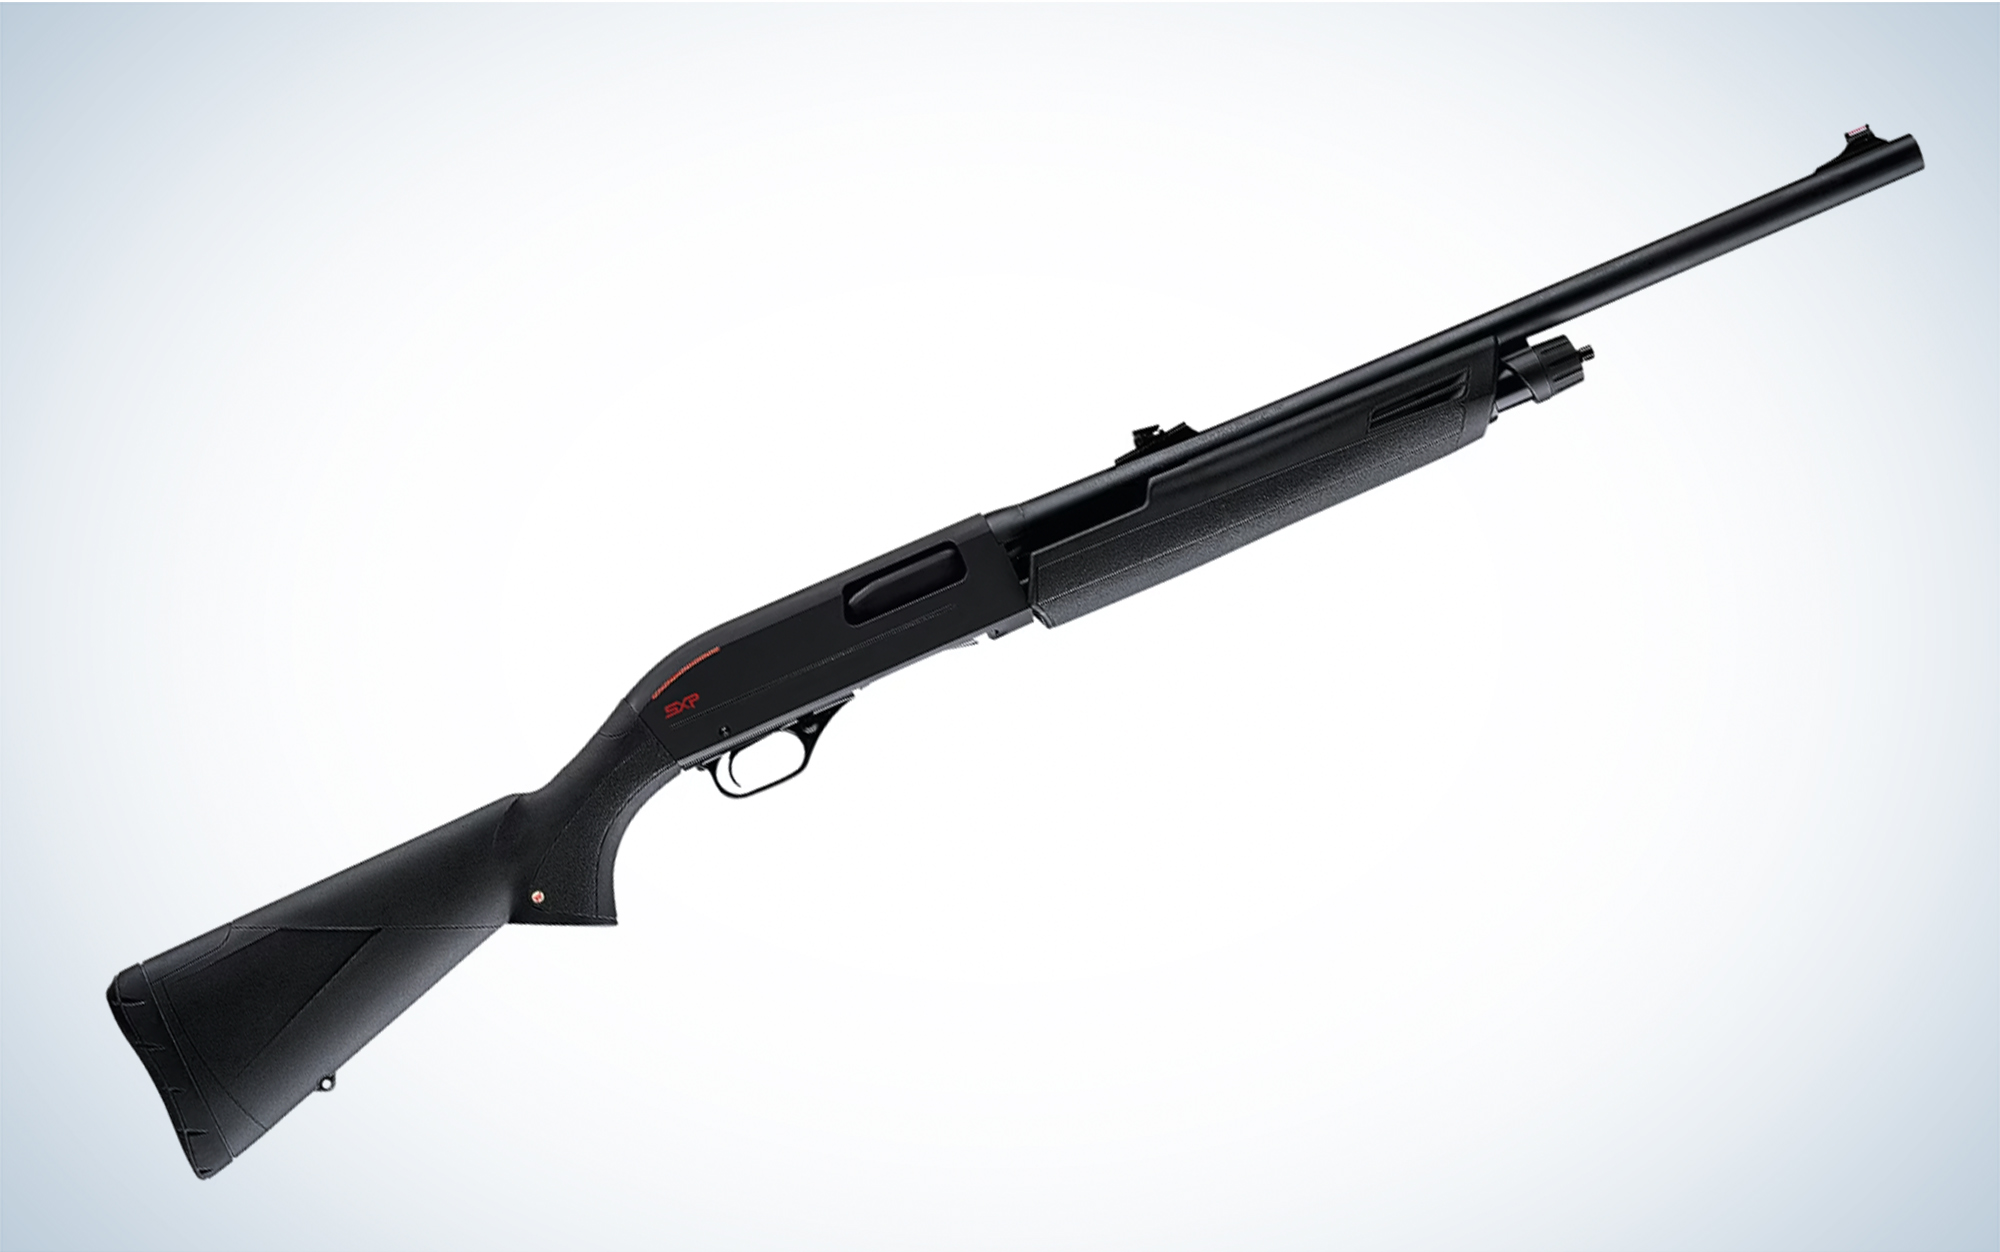 The Winchester SXP is available in 12 or 20 gauge.